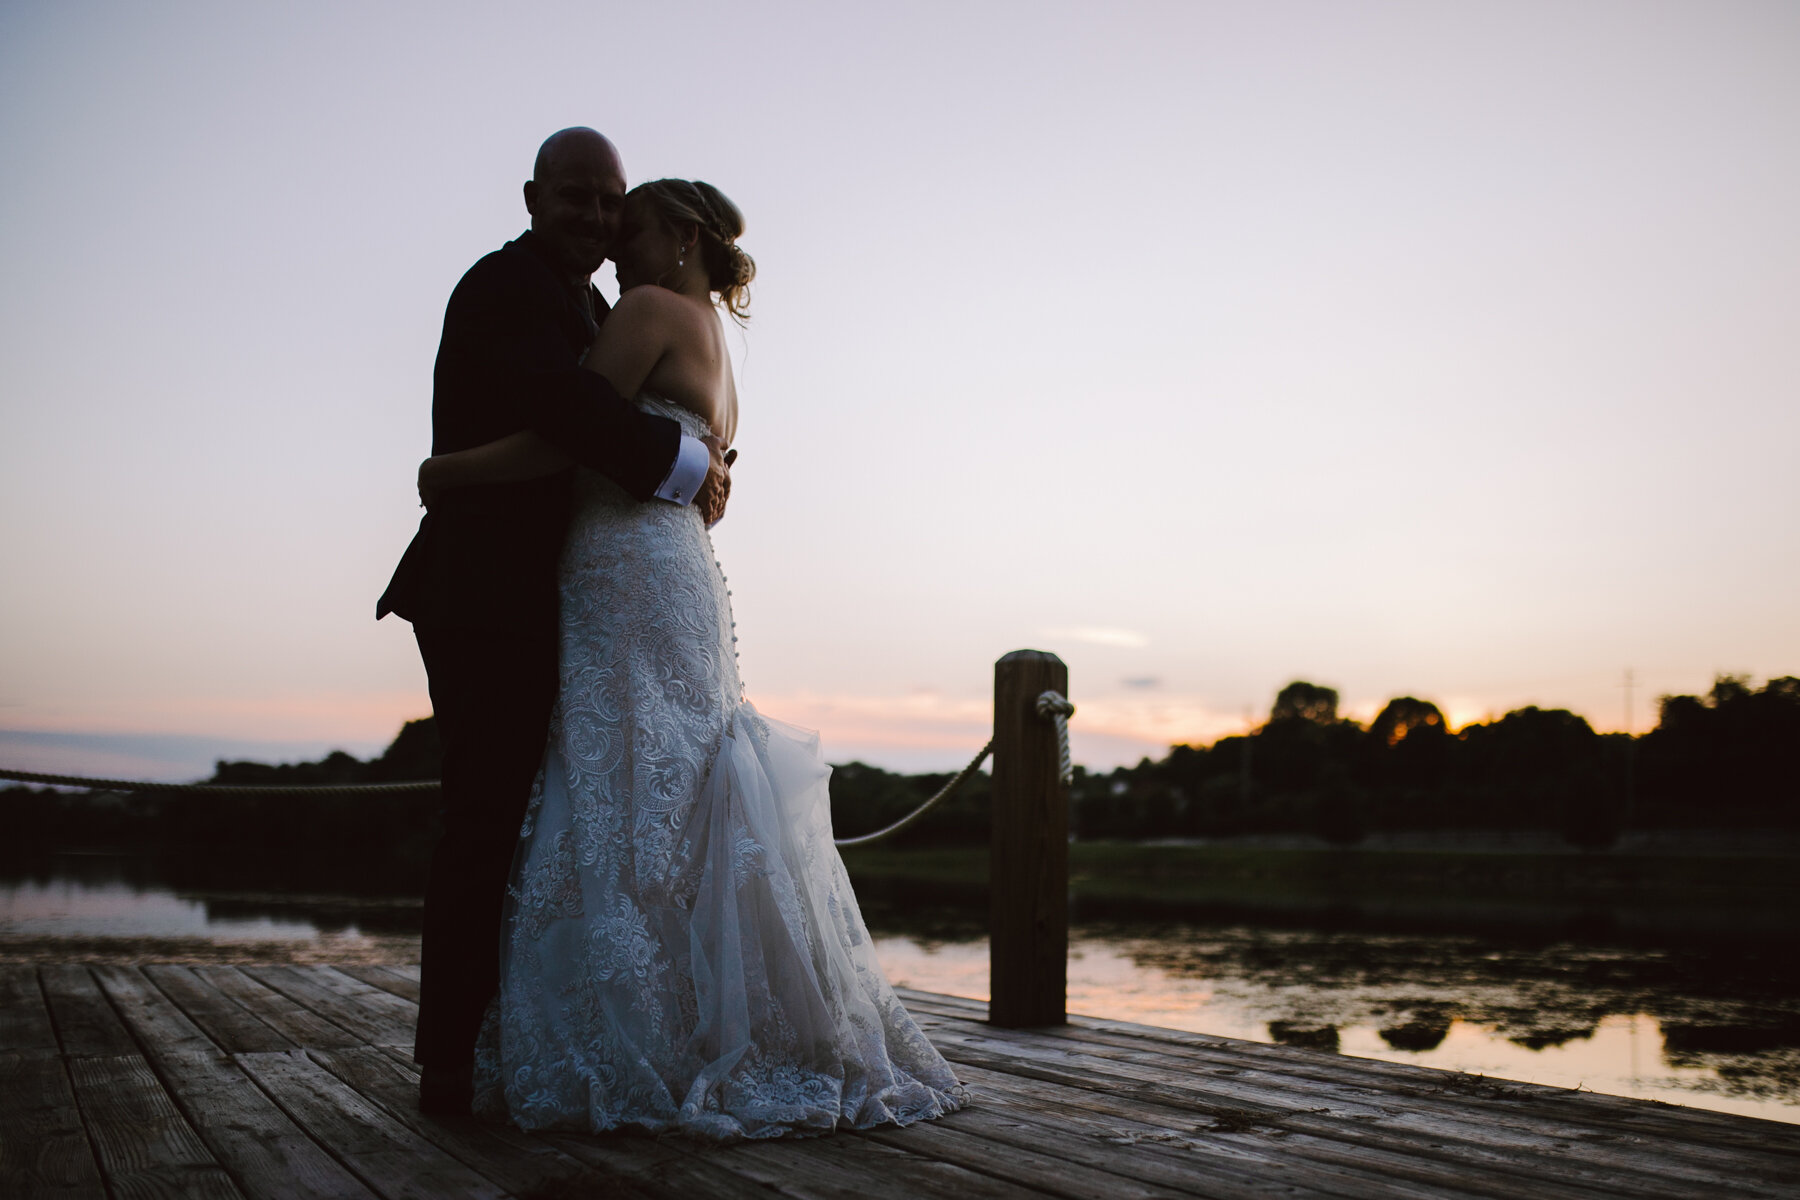 Sunset portraits after a sunny outdoor wedding at hunter valley farms in knoxville tennessee